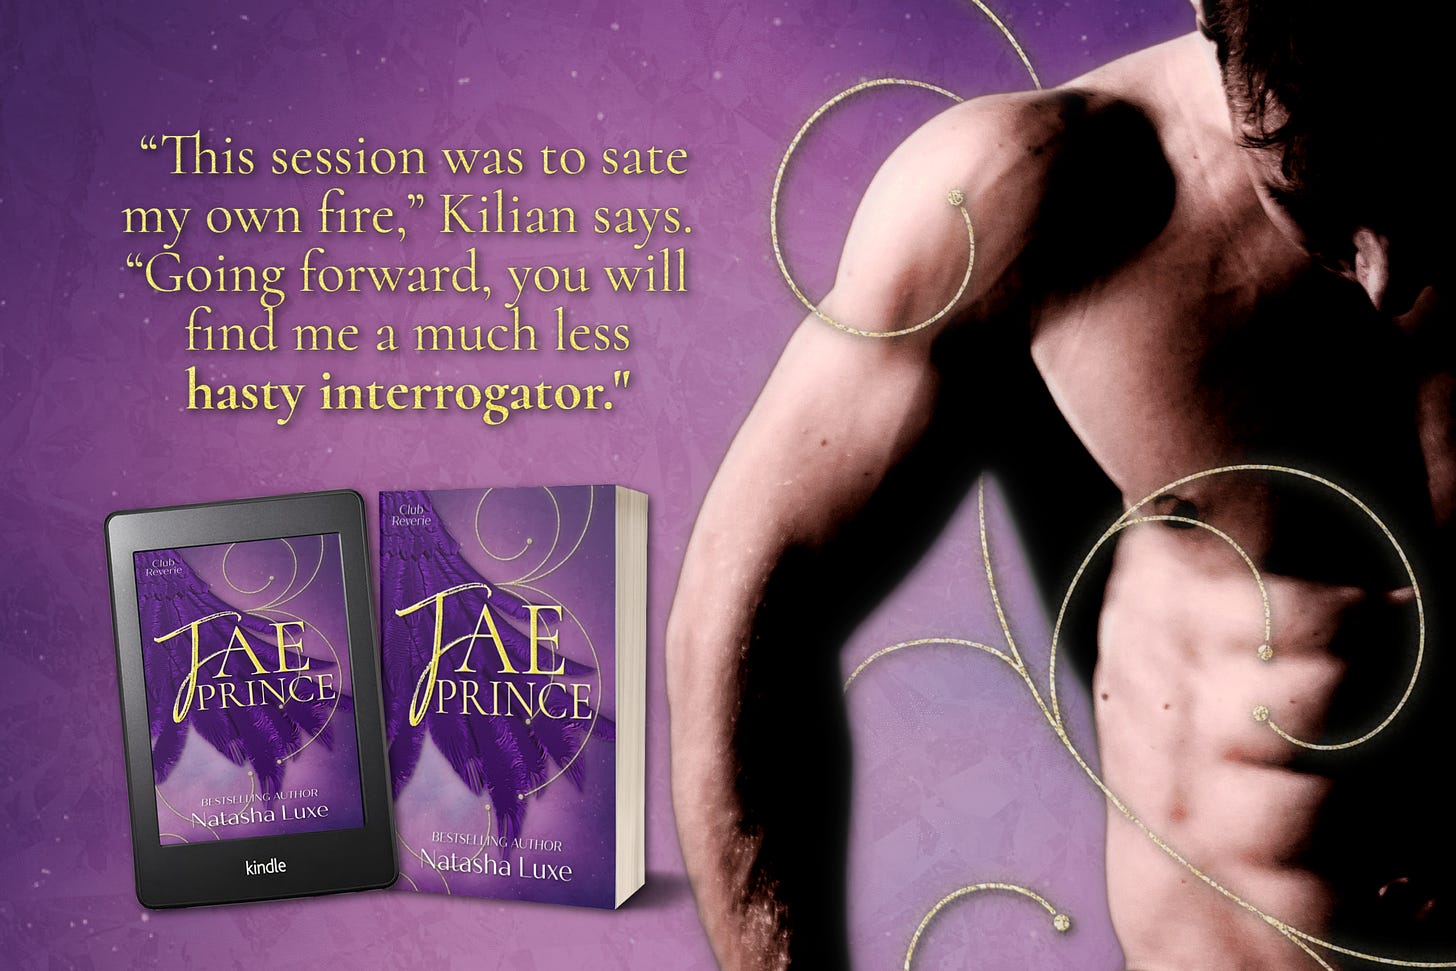 "This session was to sate my own fire," Kilian says. "Going forward, you will find me a much less hasty interrogator." Book cover, shirtless attractive man